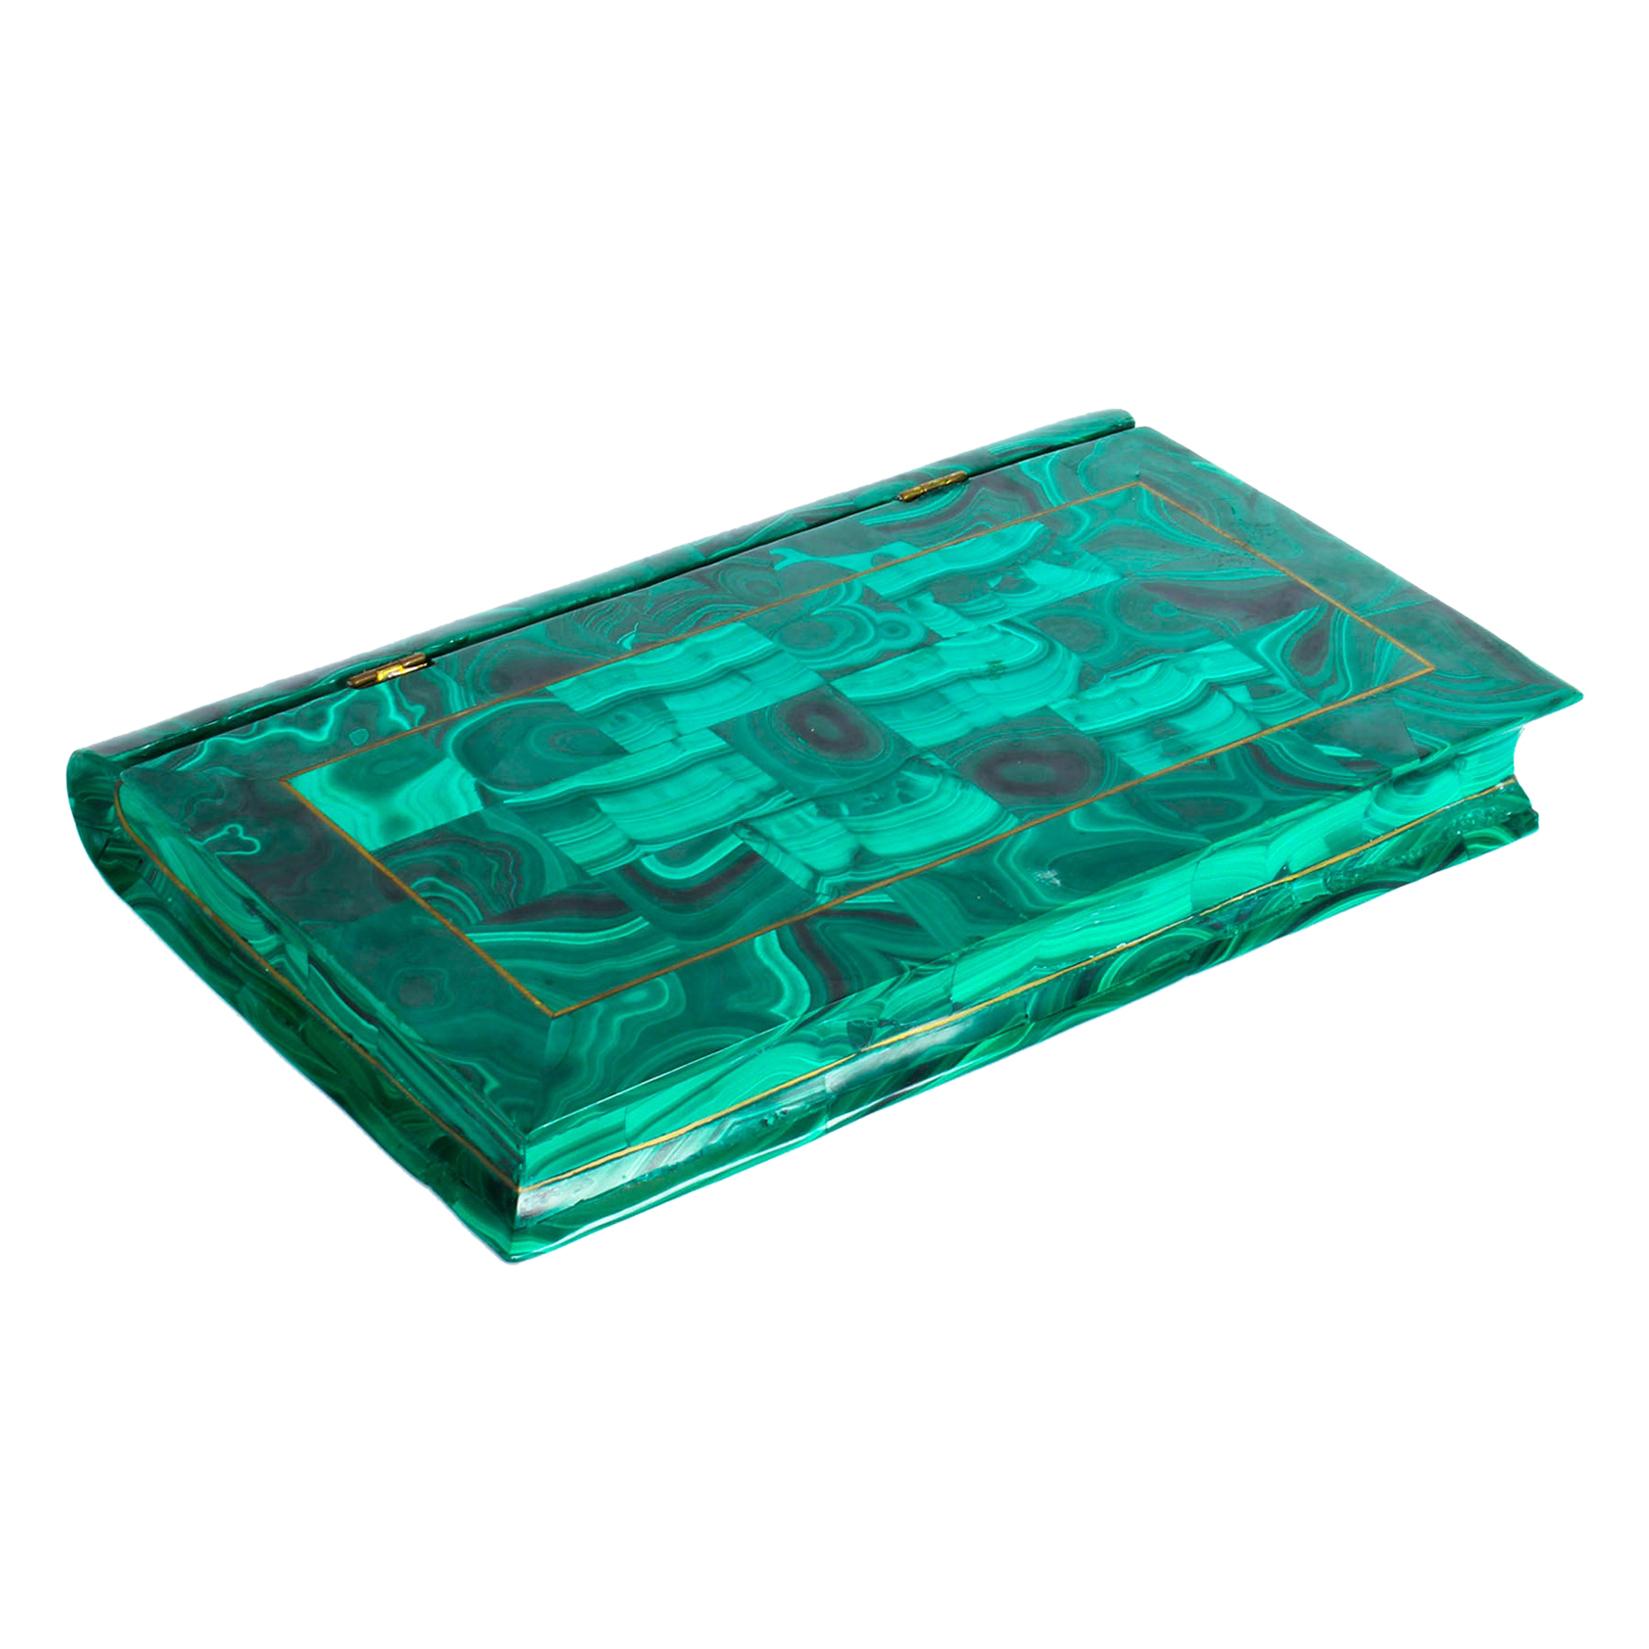 Early 20th Century Russian Malachite Book Form Box with Mineral Specimens